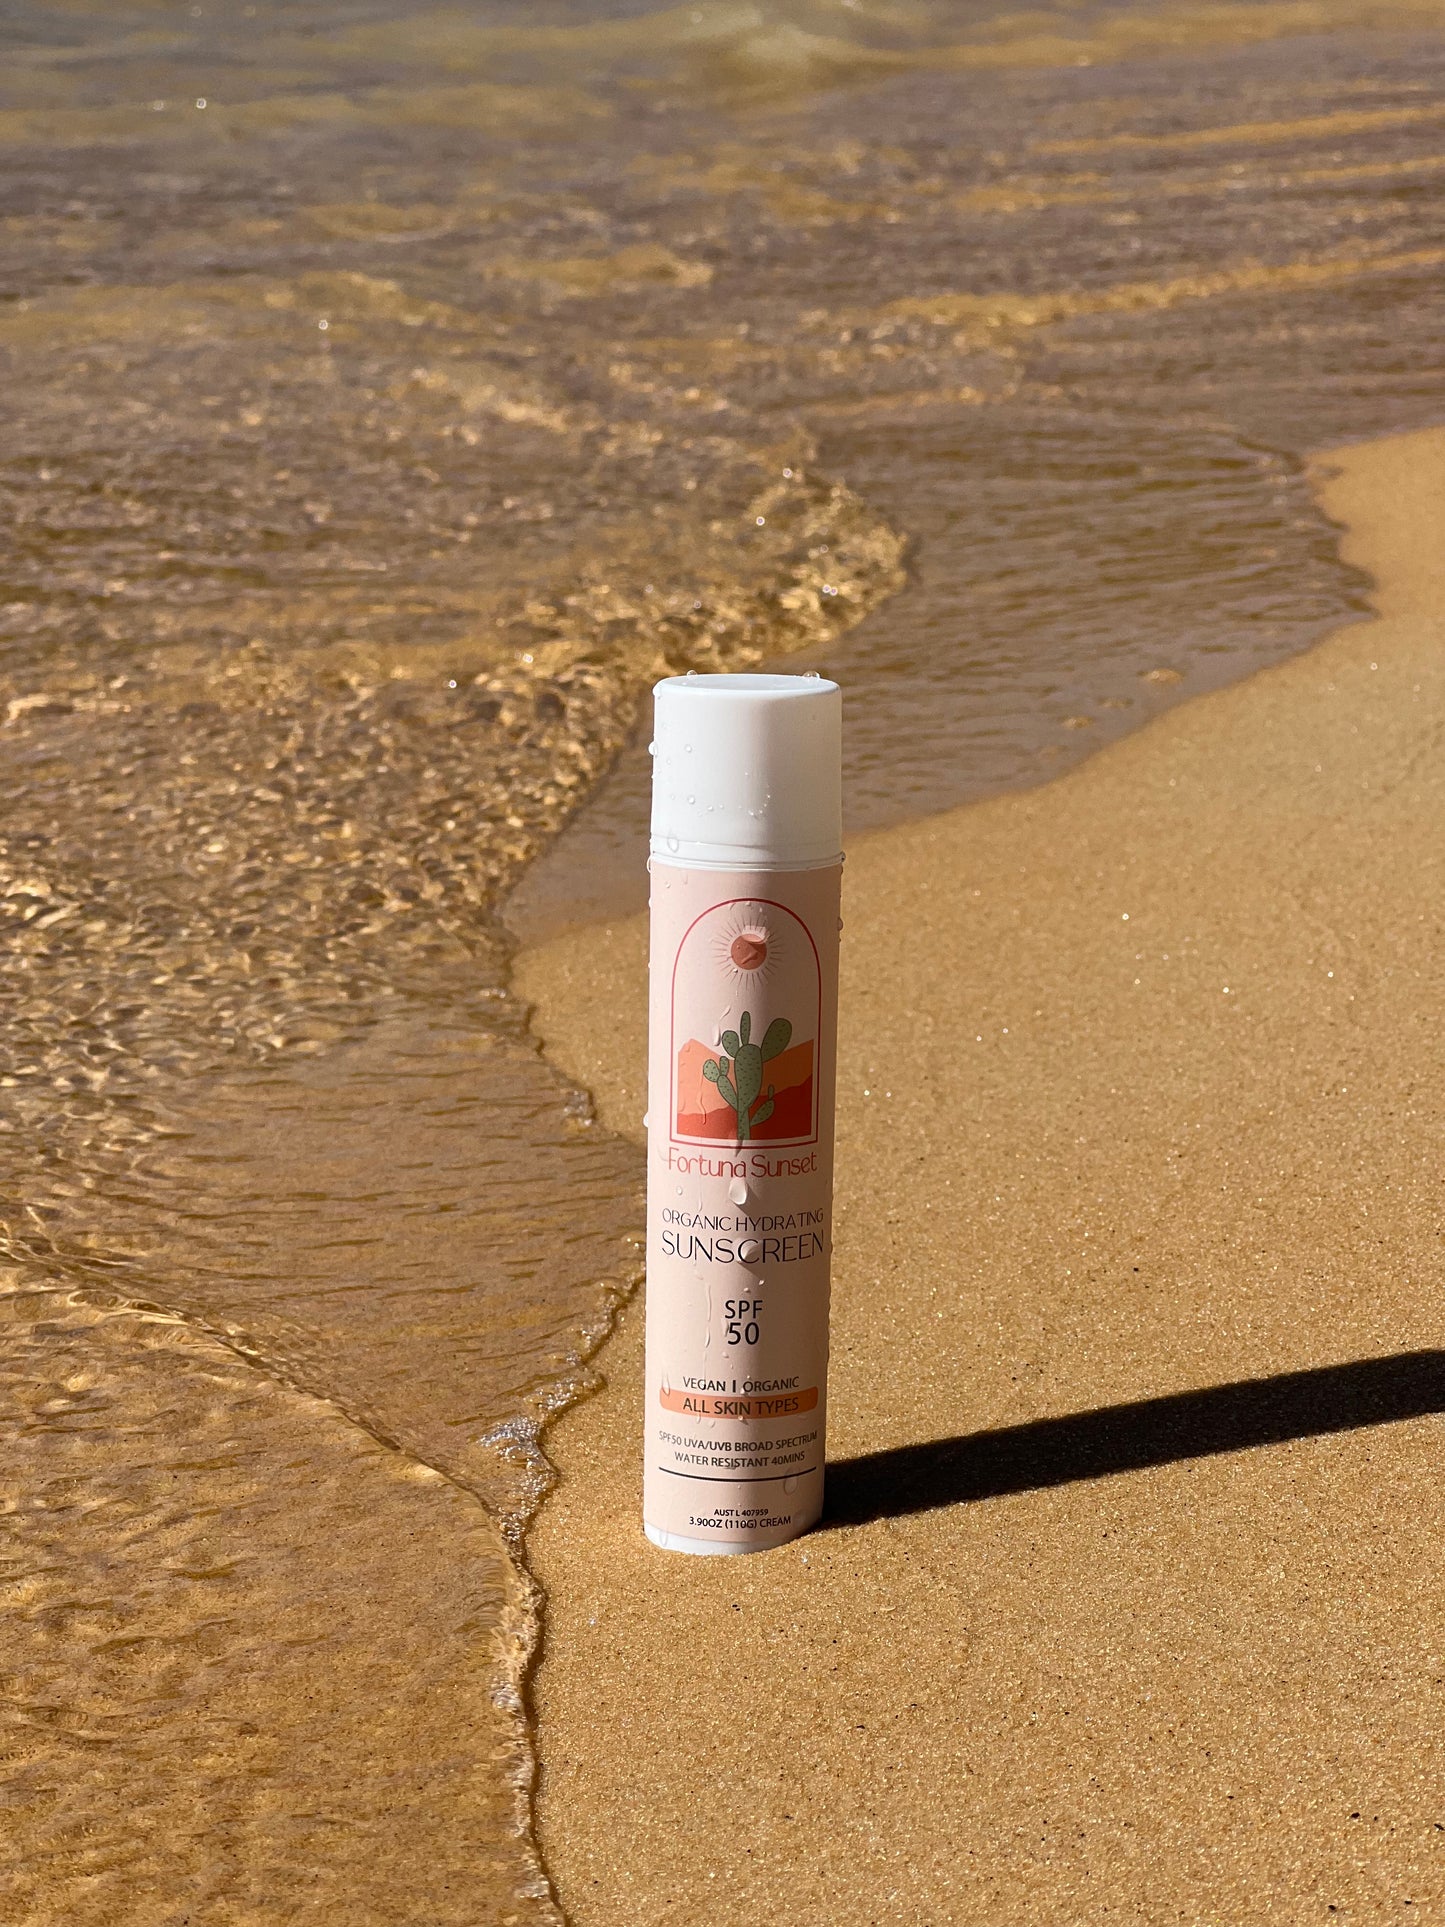 Organic SPF50 Hydrating Sunscreen with Hyaluronic Acid